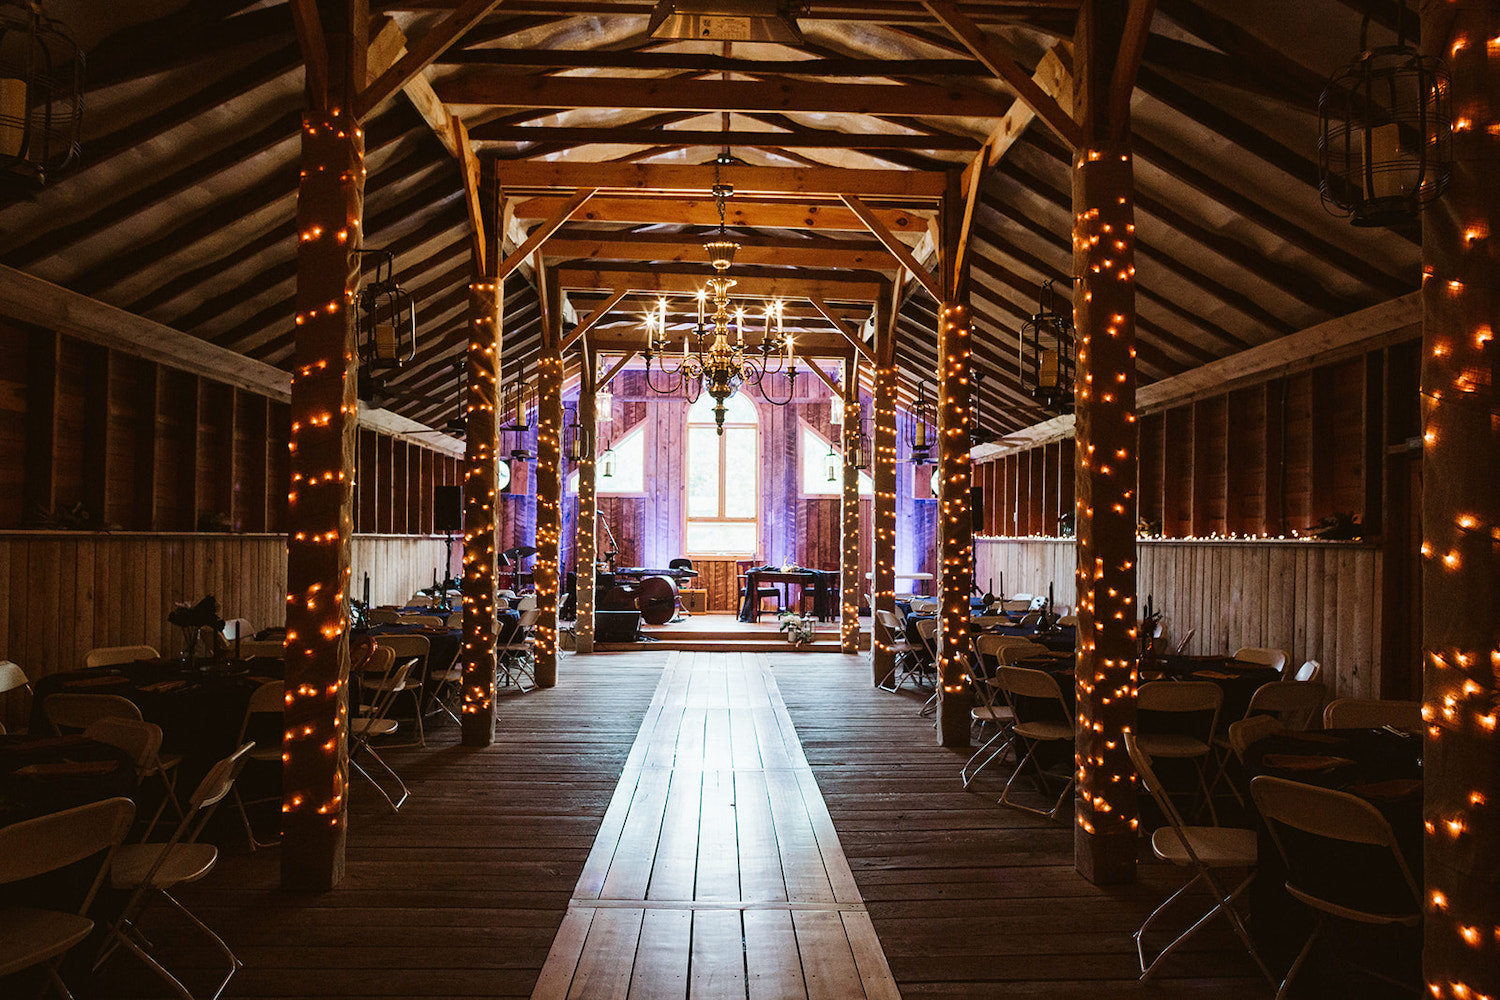 interior barn reception hall with exposed rafters and beams strung with white lights and a candelabra